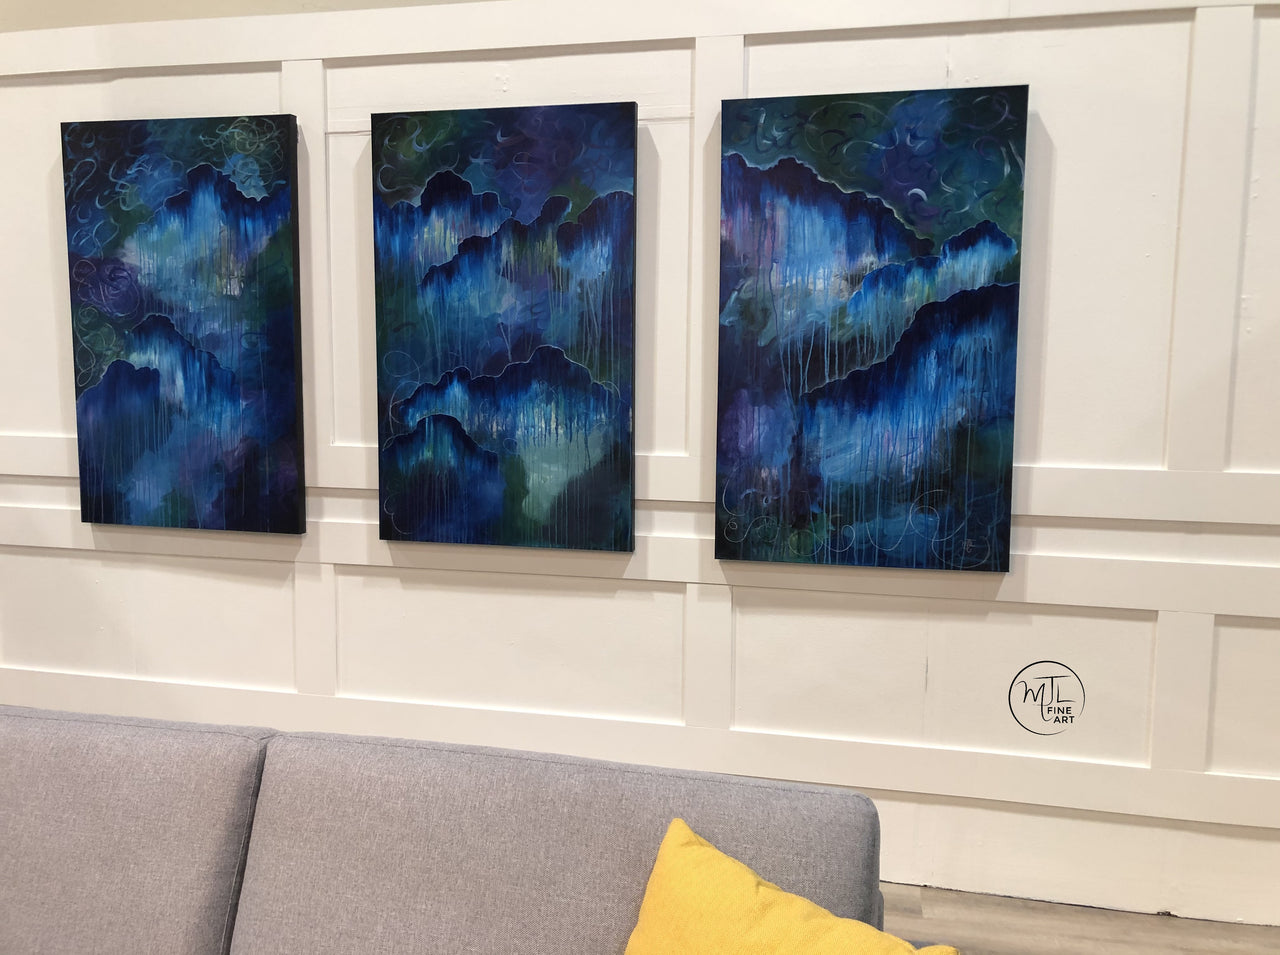 The Sky is Crying: acrylic on canvas series - three 30" x 48" canvases